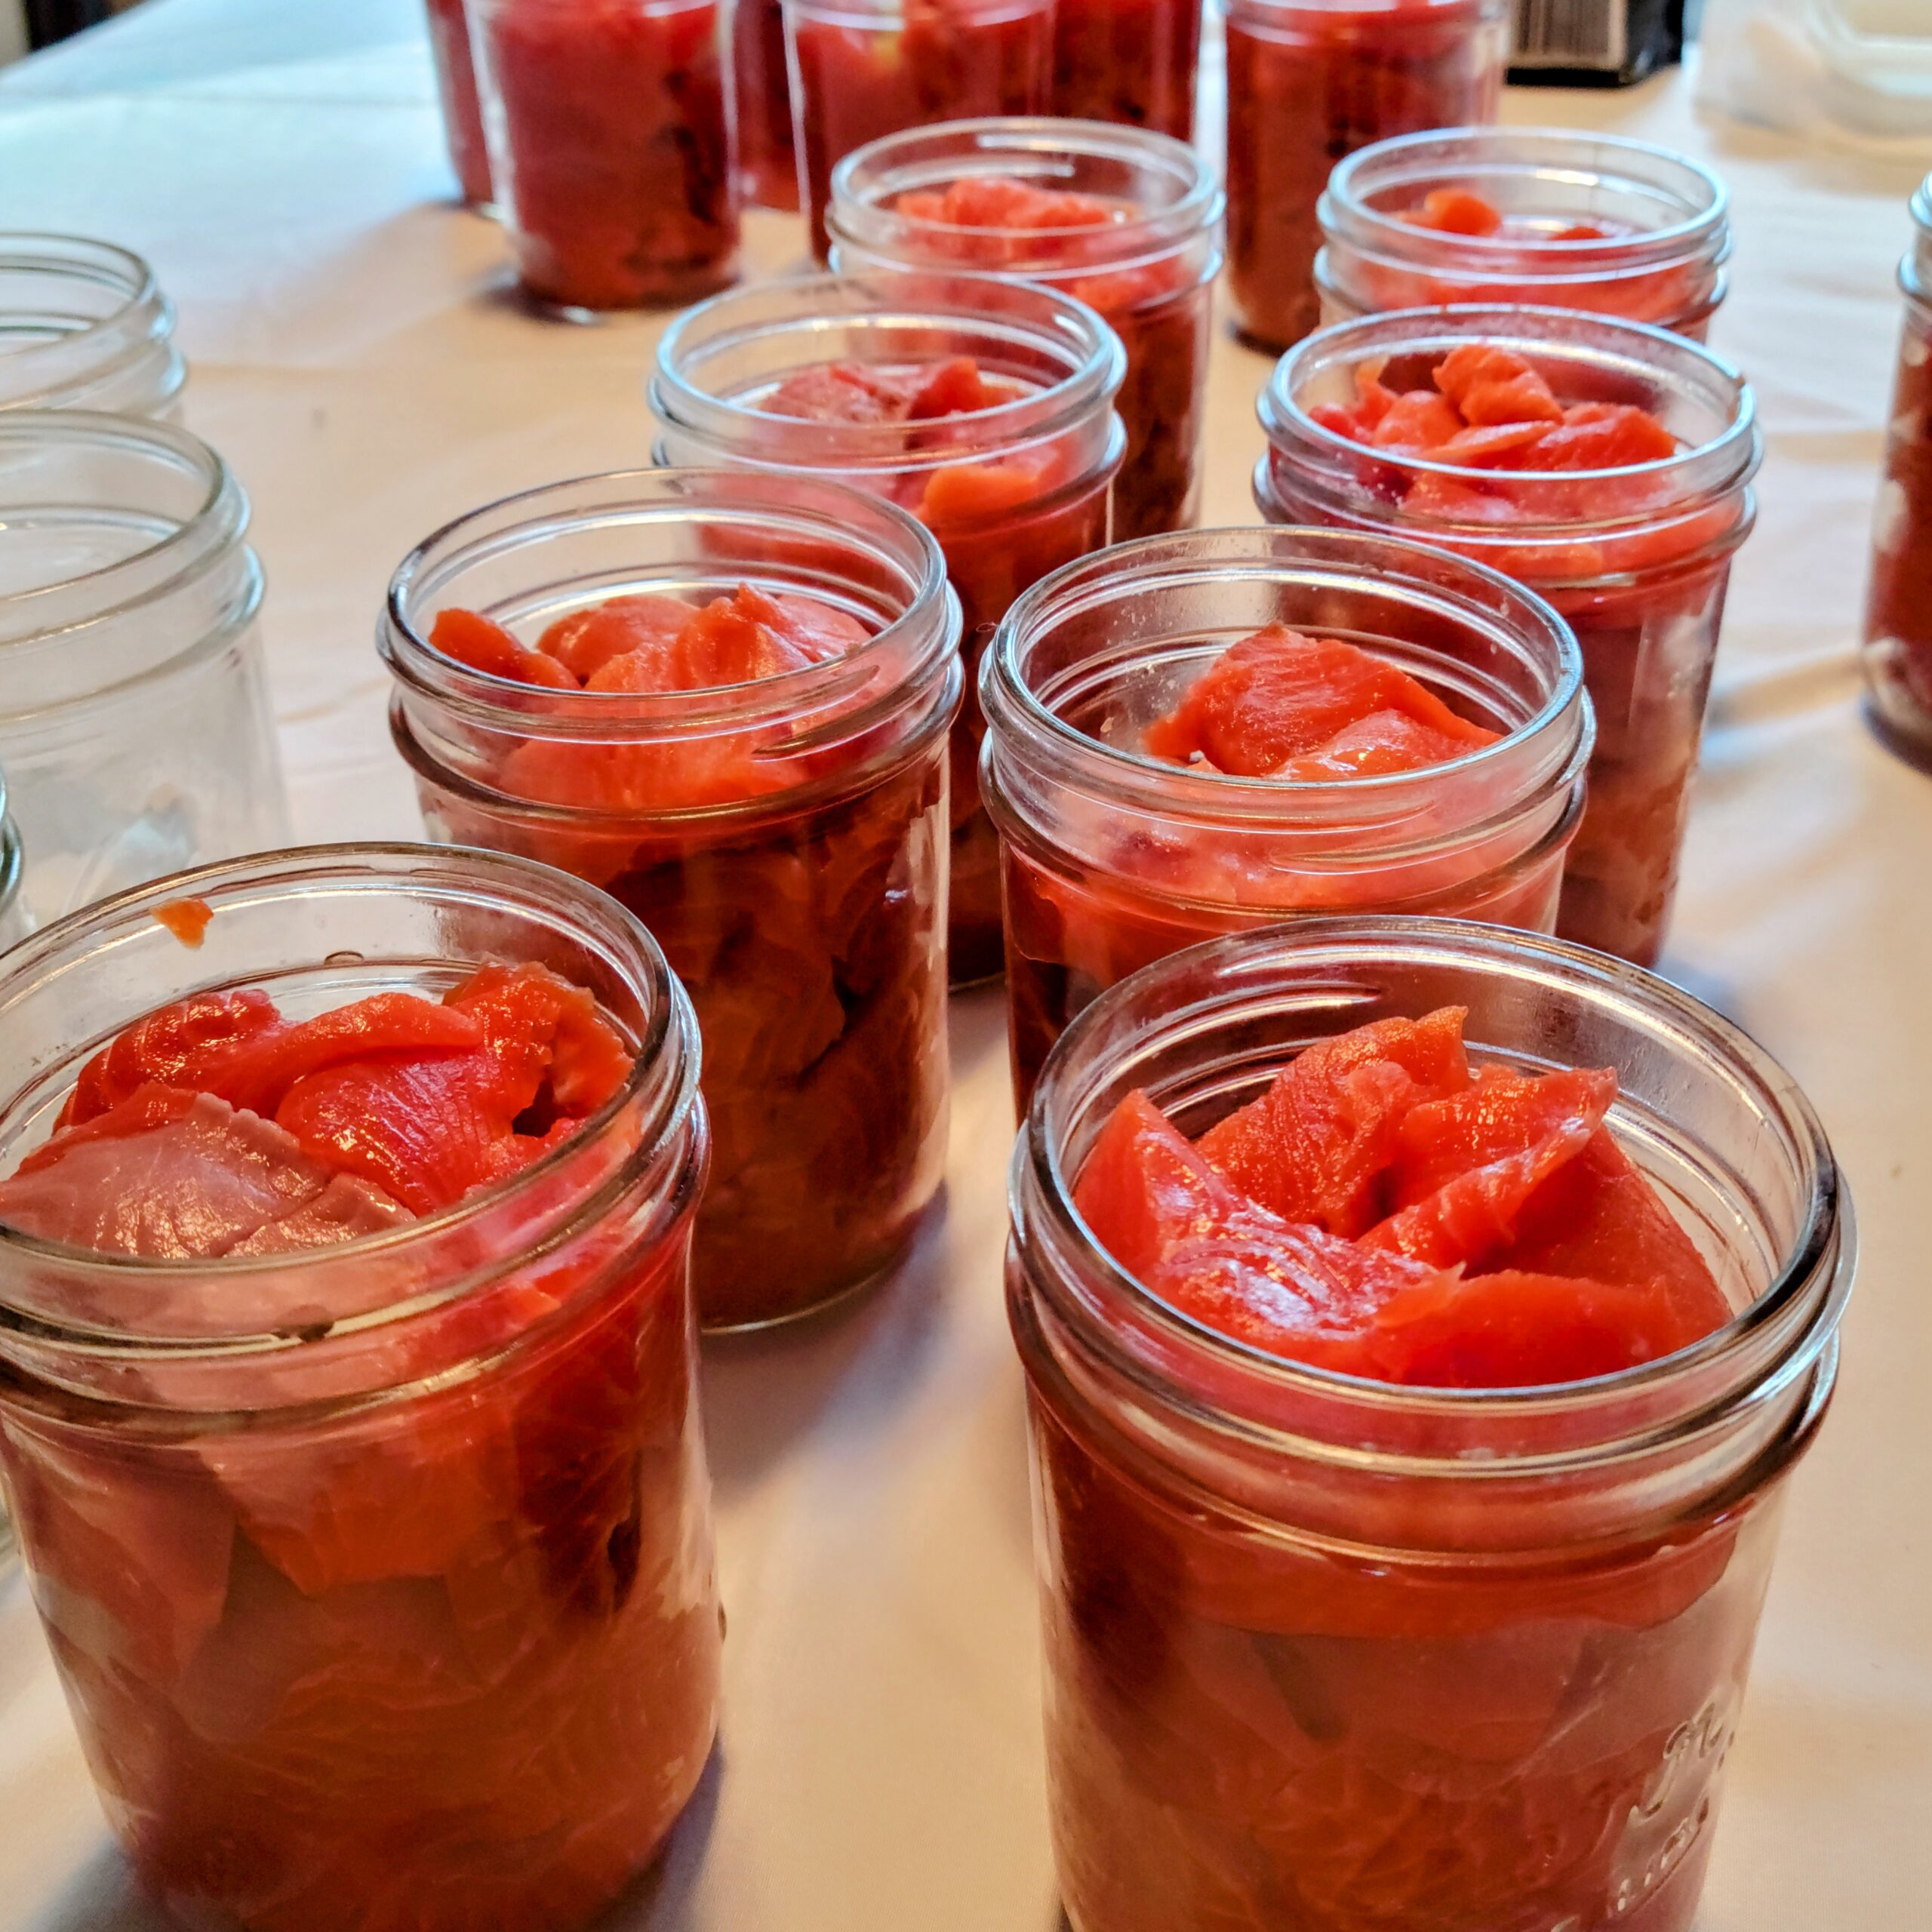 Jars of red salmon on a table.